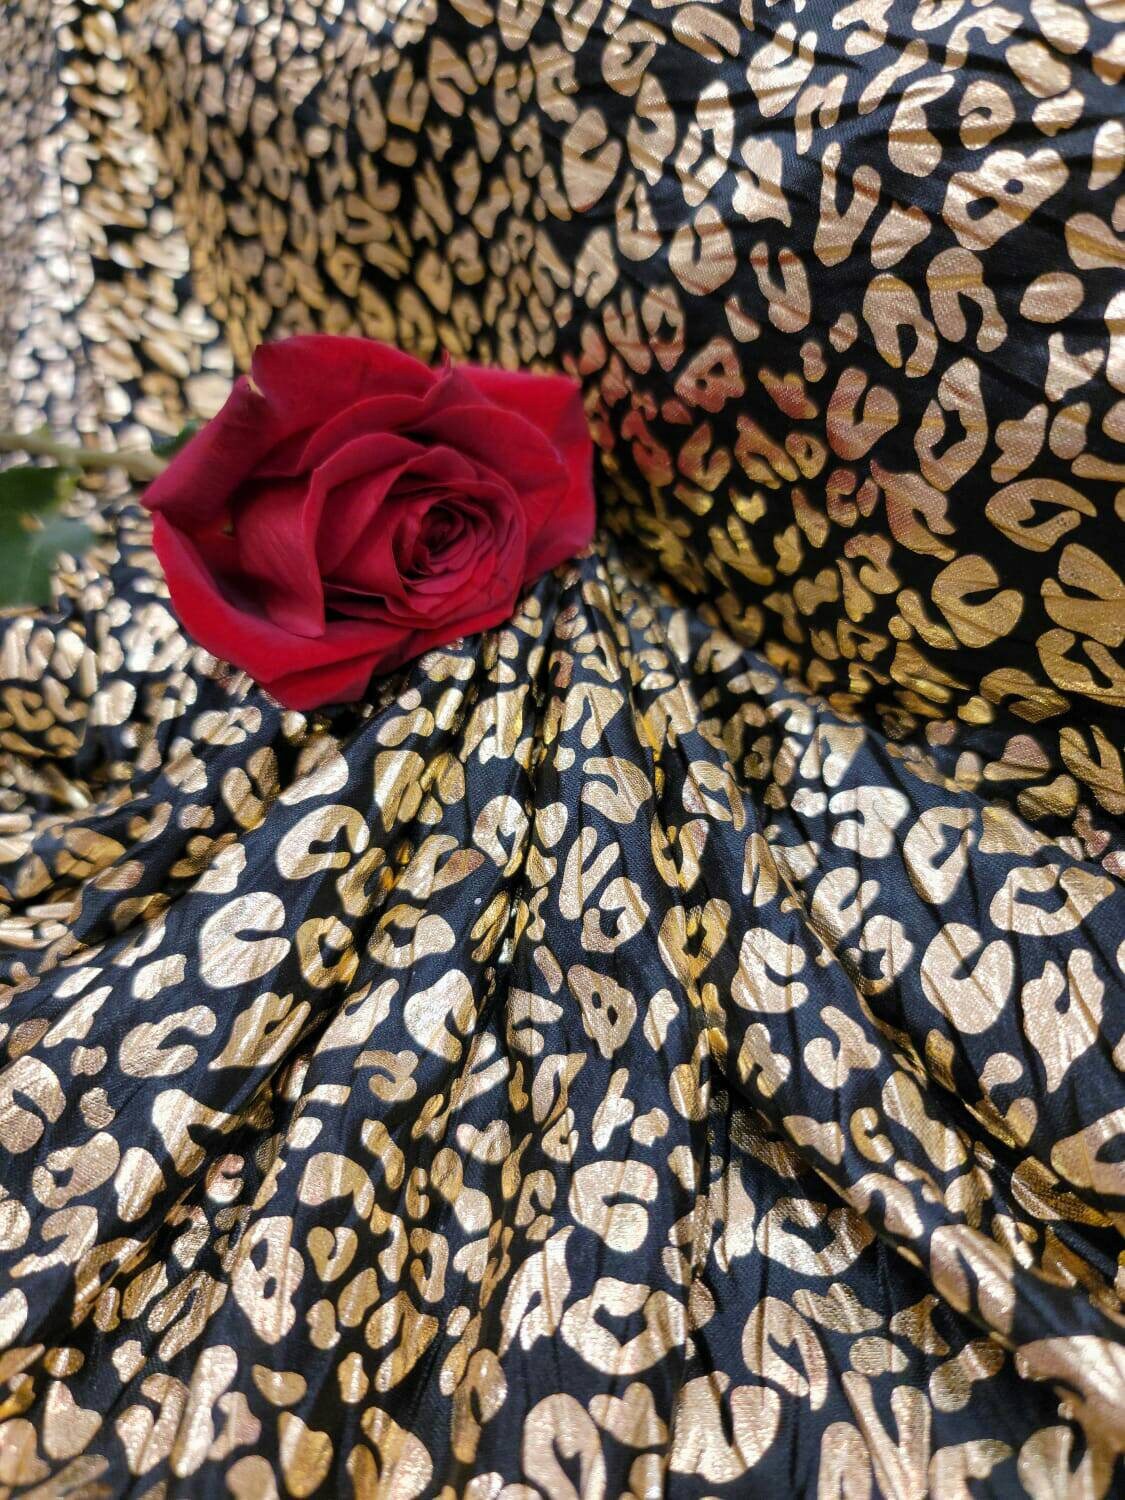 Gold Black Cheetah Stretch Fabric Sold By The Yard Gown Gorgeous Fabric Stretch Clothing Draping Decoration Gorgeous Snake Stretch Fabric